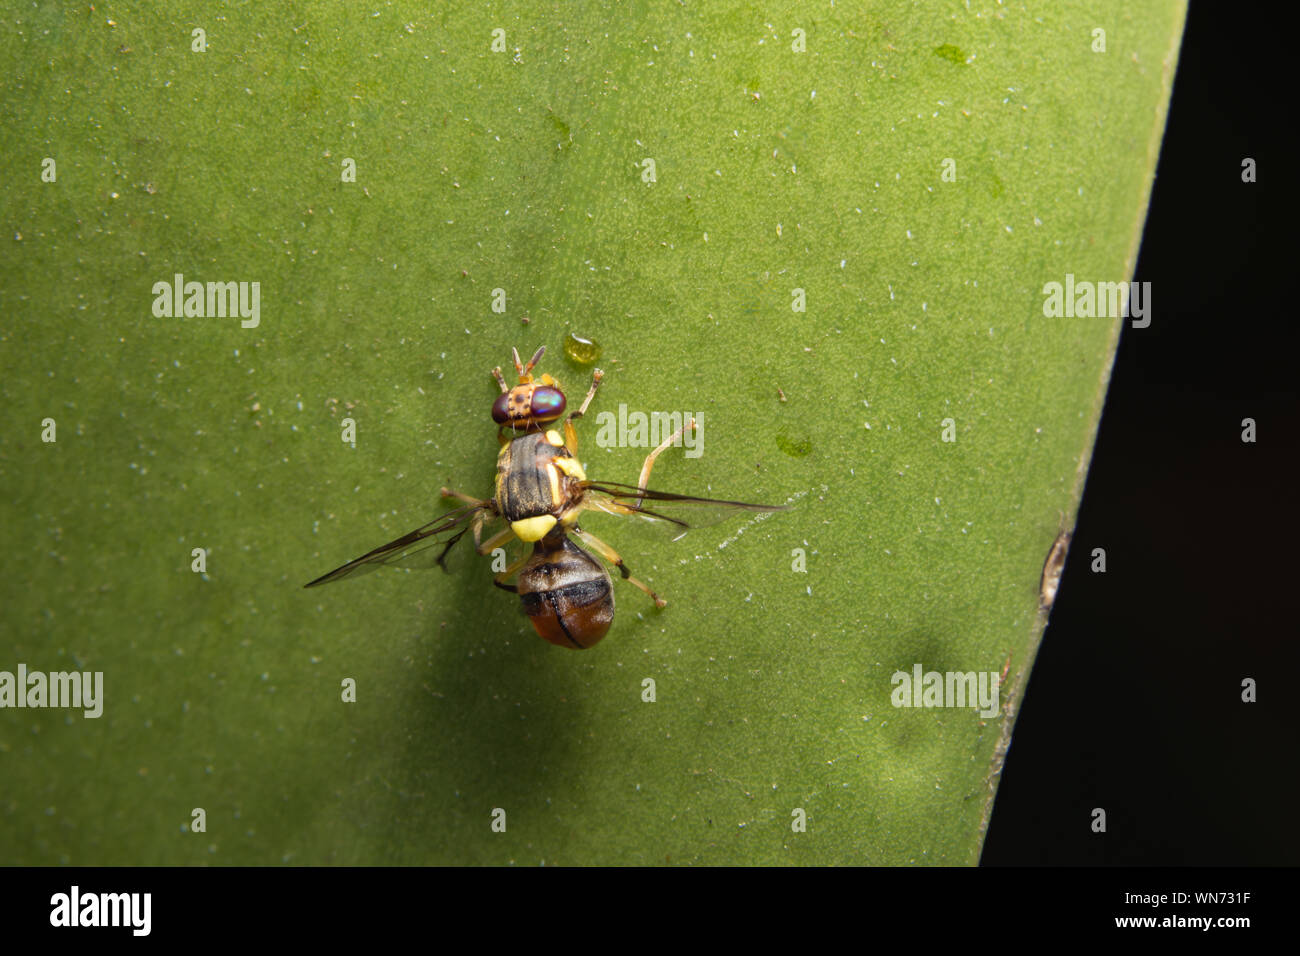 Close-up Of Fruitfly On Green Plant Against Black Background Stock Photo